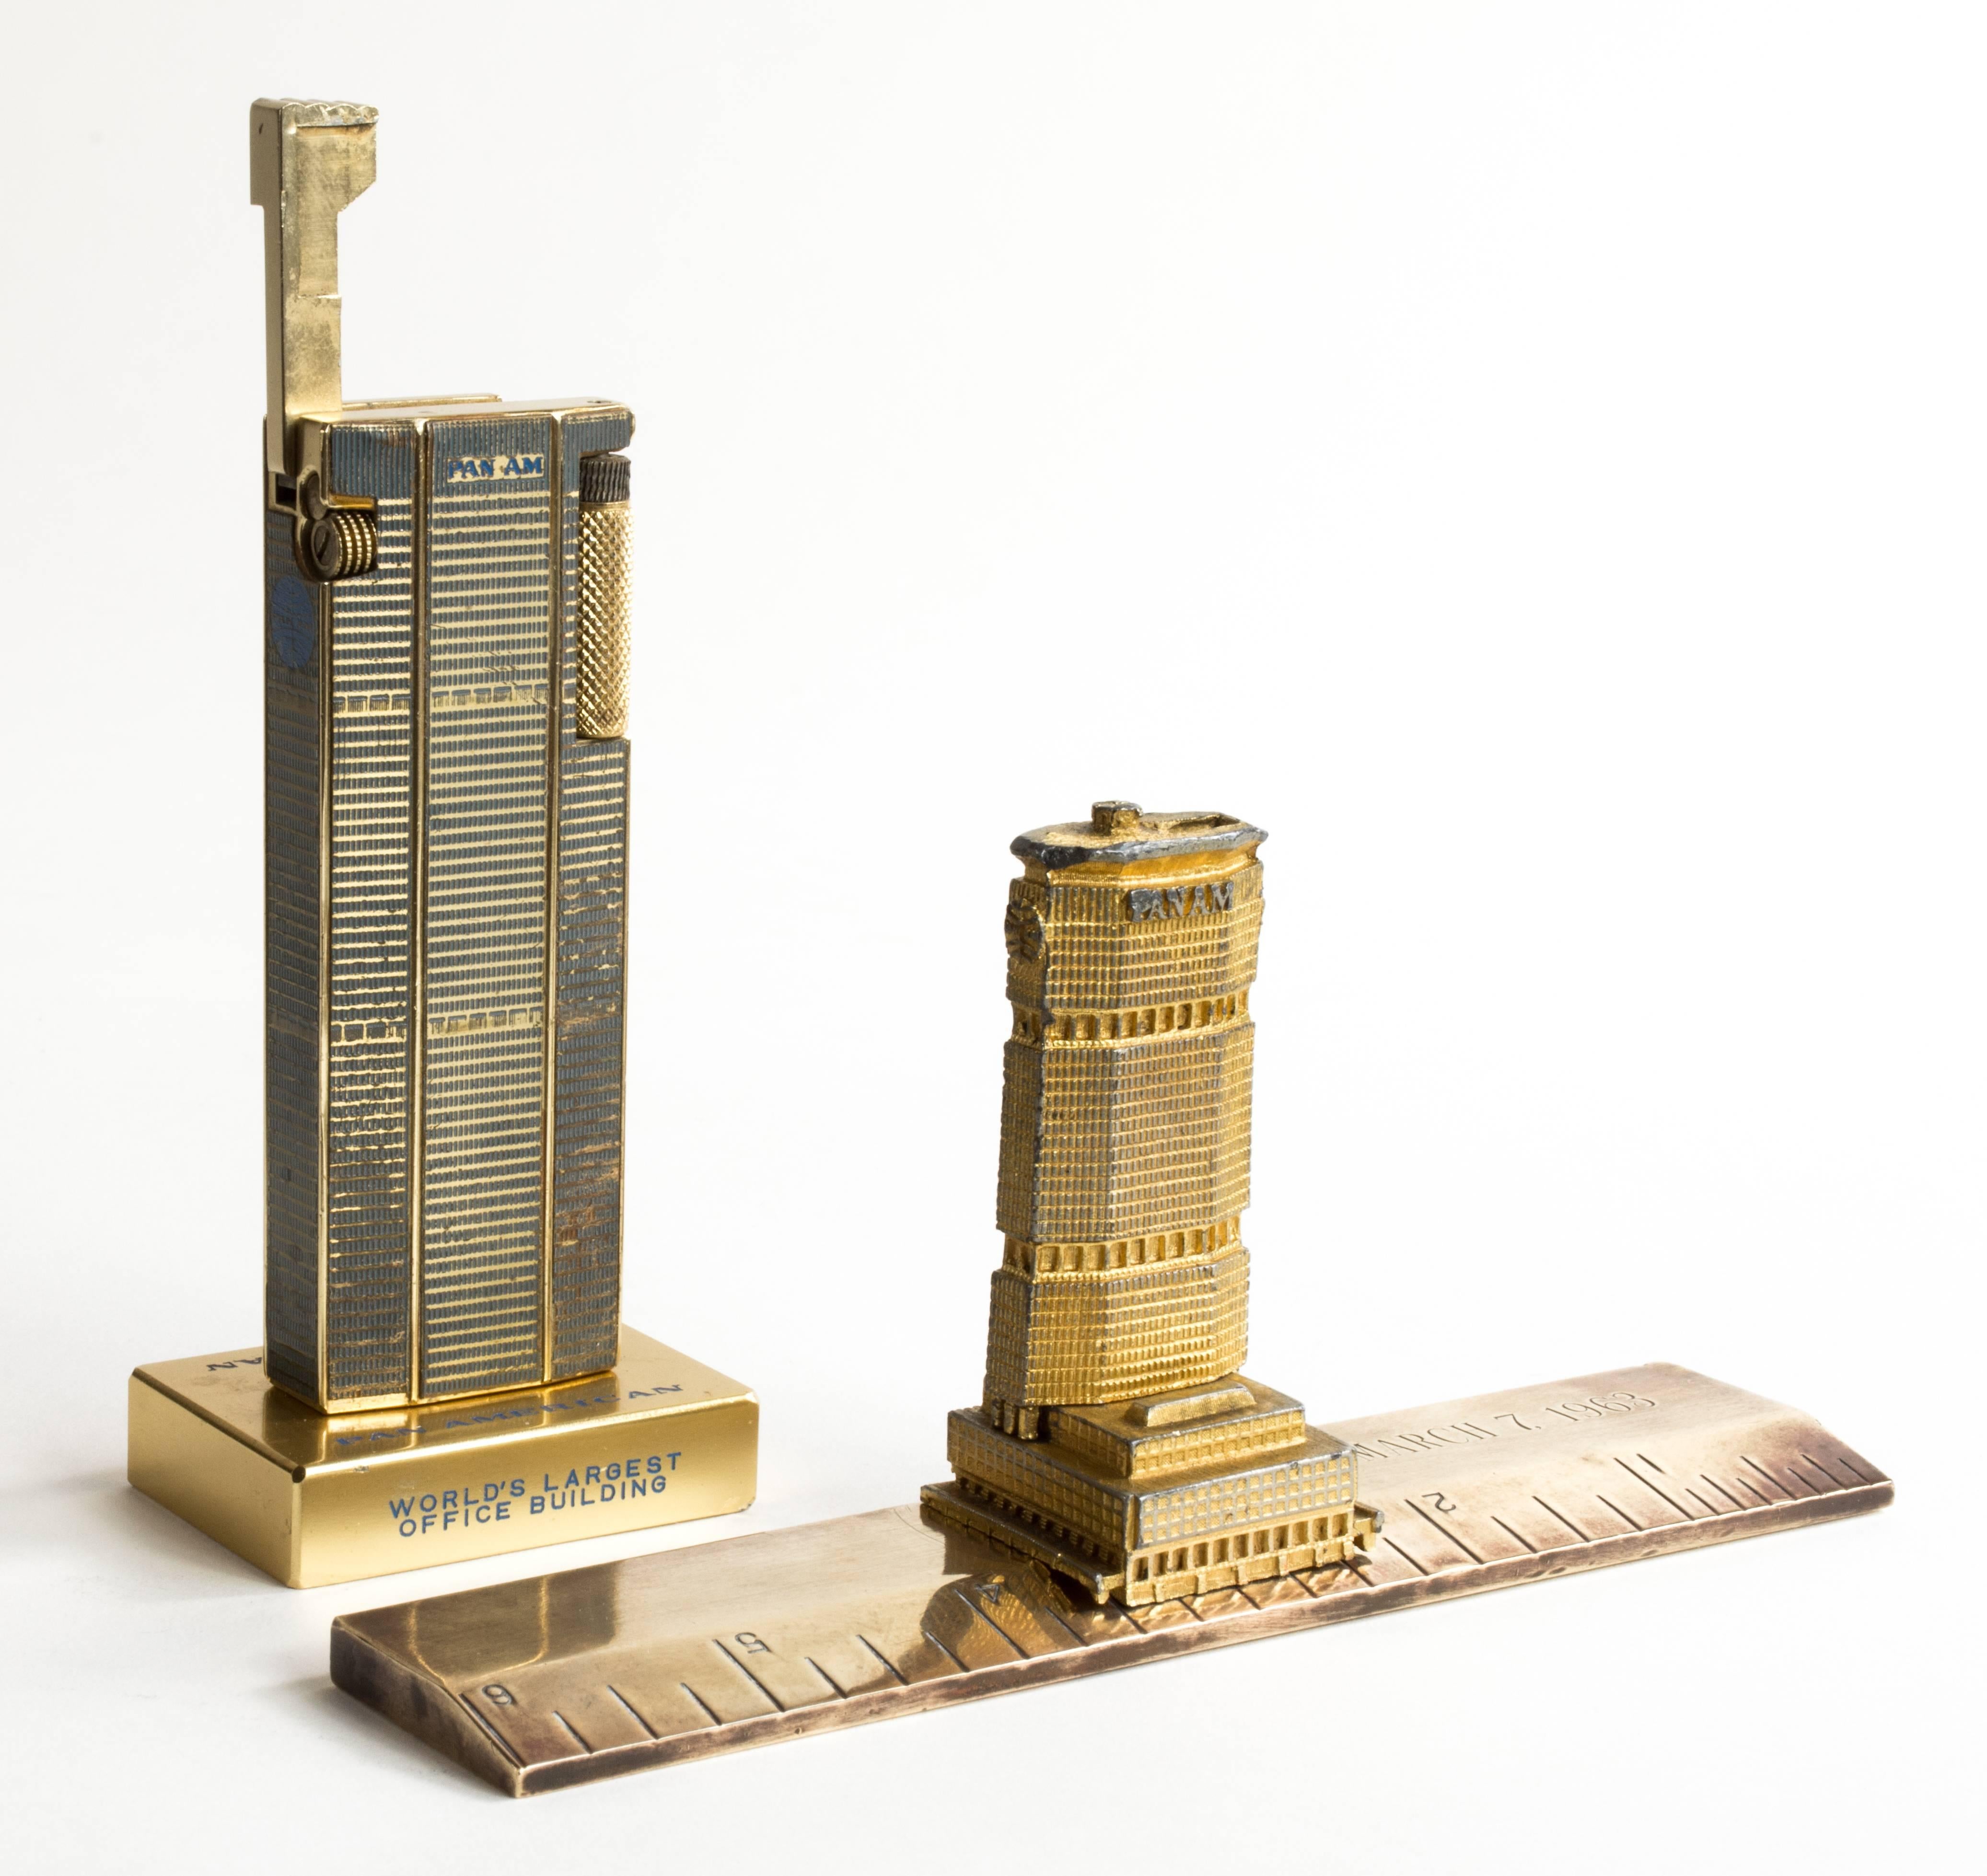 Pan Am Building Lighter & Ruler

Two Pan Am Building Souvenir Models, New York
Polished and painted brass lift-arm lighter
4 1/4